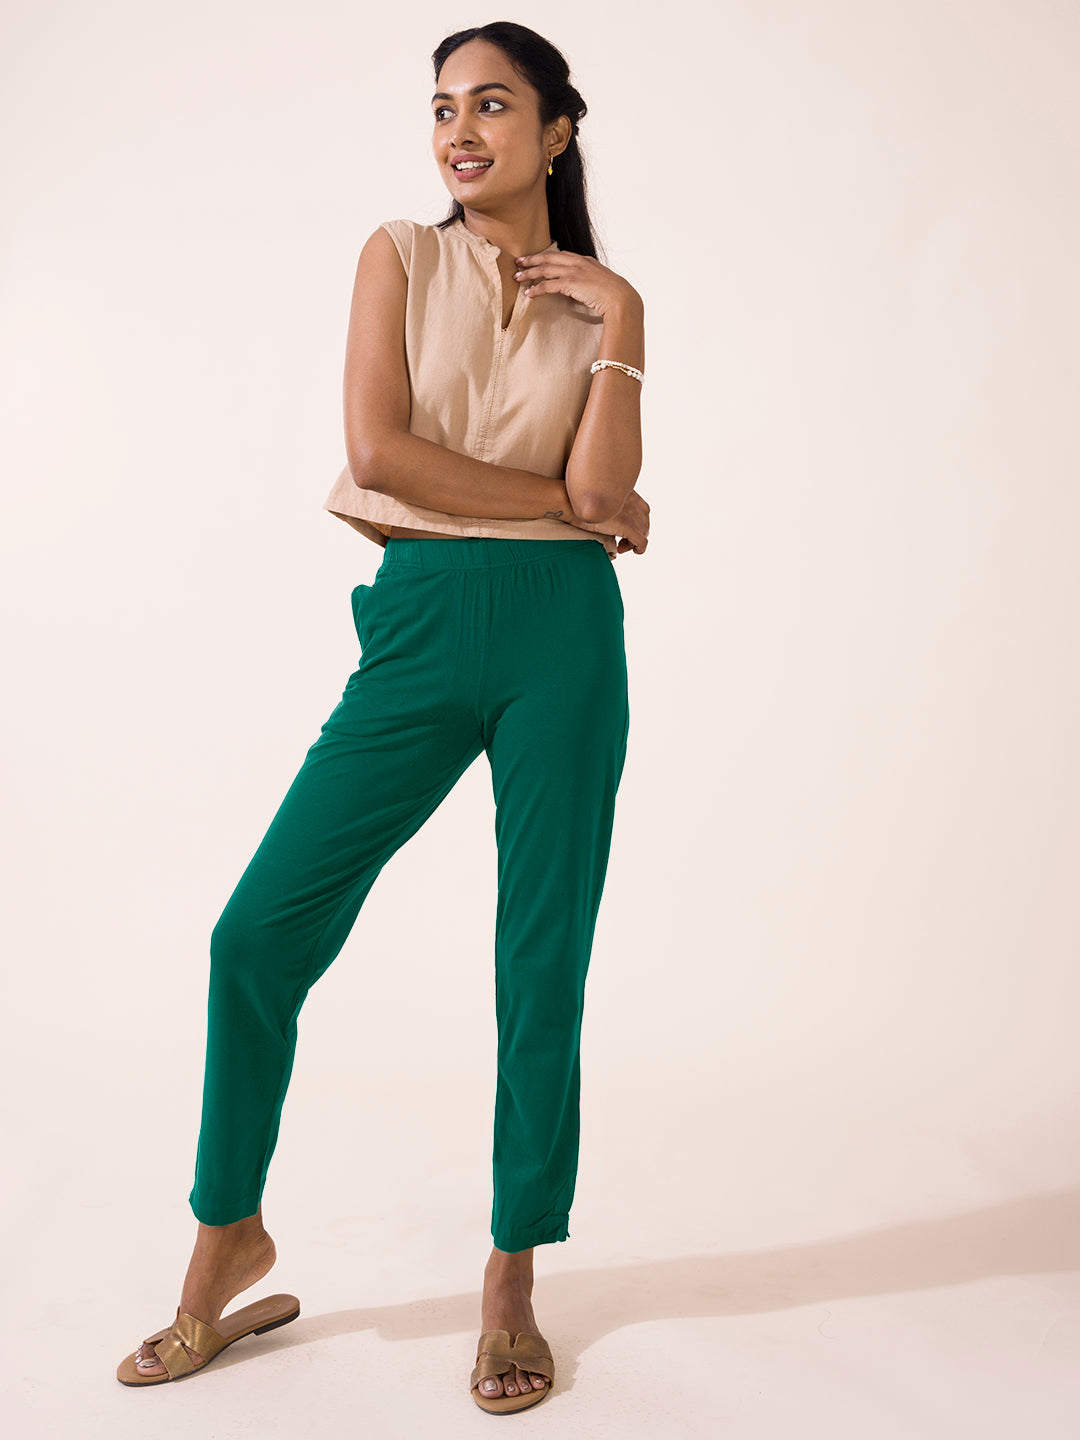 Buy GO COLORS Womens 2 Pocket Solid Pants | Shoppers Stop